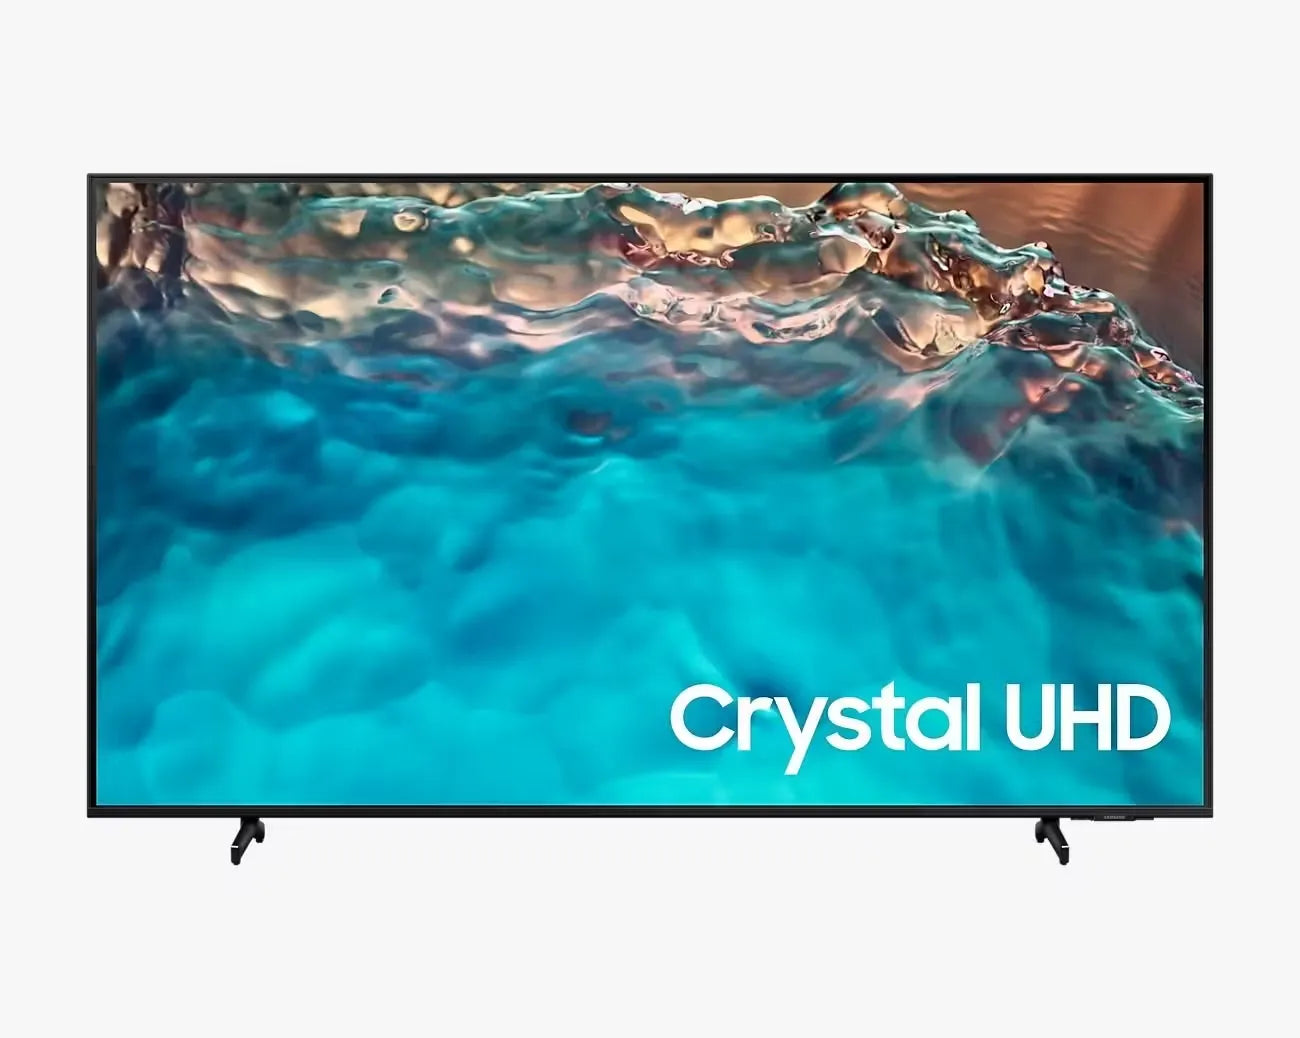 Samsung 50-inch 4K UHD Smart TV (UA50BU8000UXZN) displaying a vibrant image on a sleek, slim design. Immerse yourself in stunning visuals with Crystal Processor 4K and Dynamic Crystal Color technology.